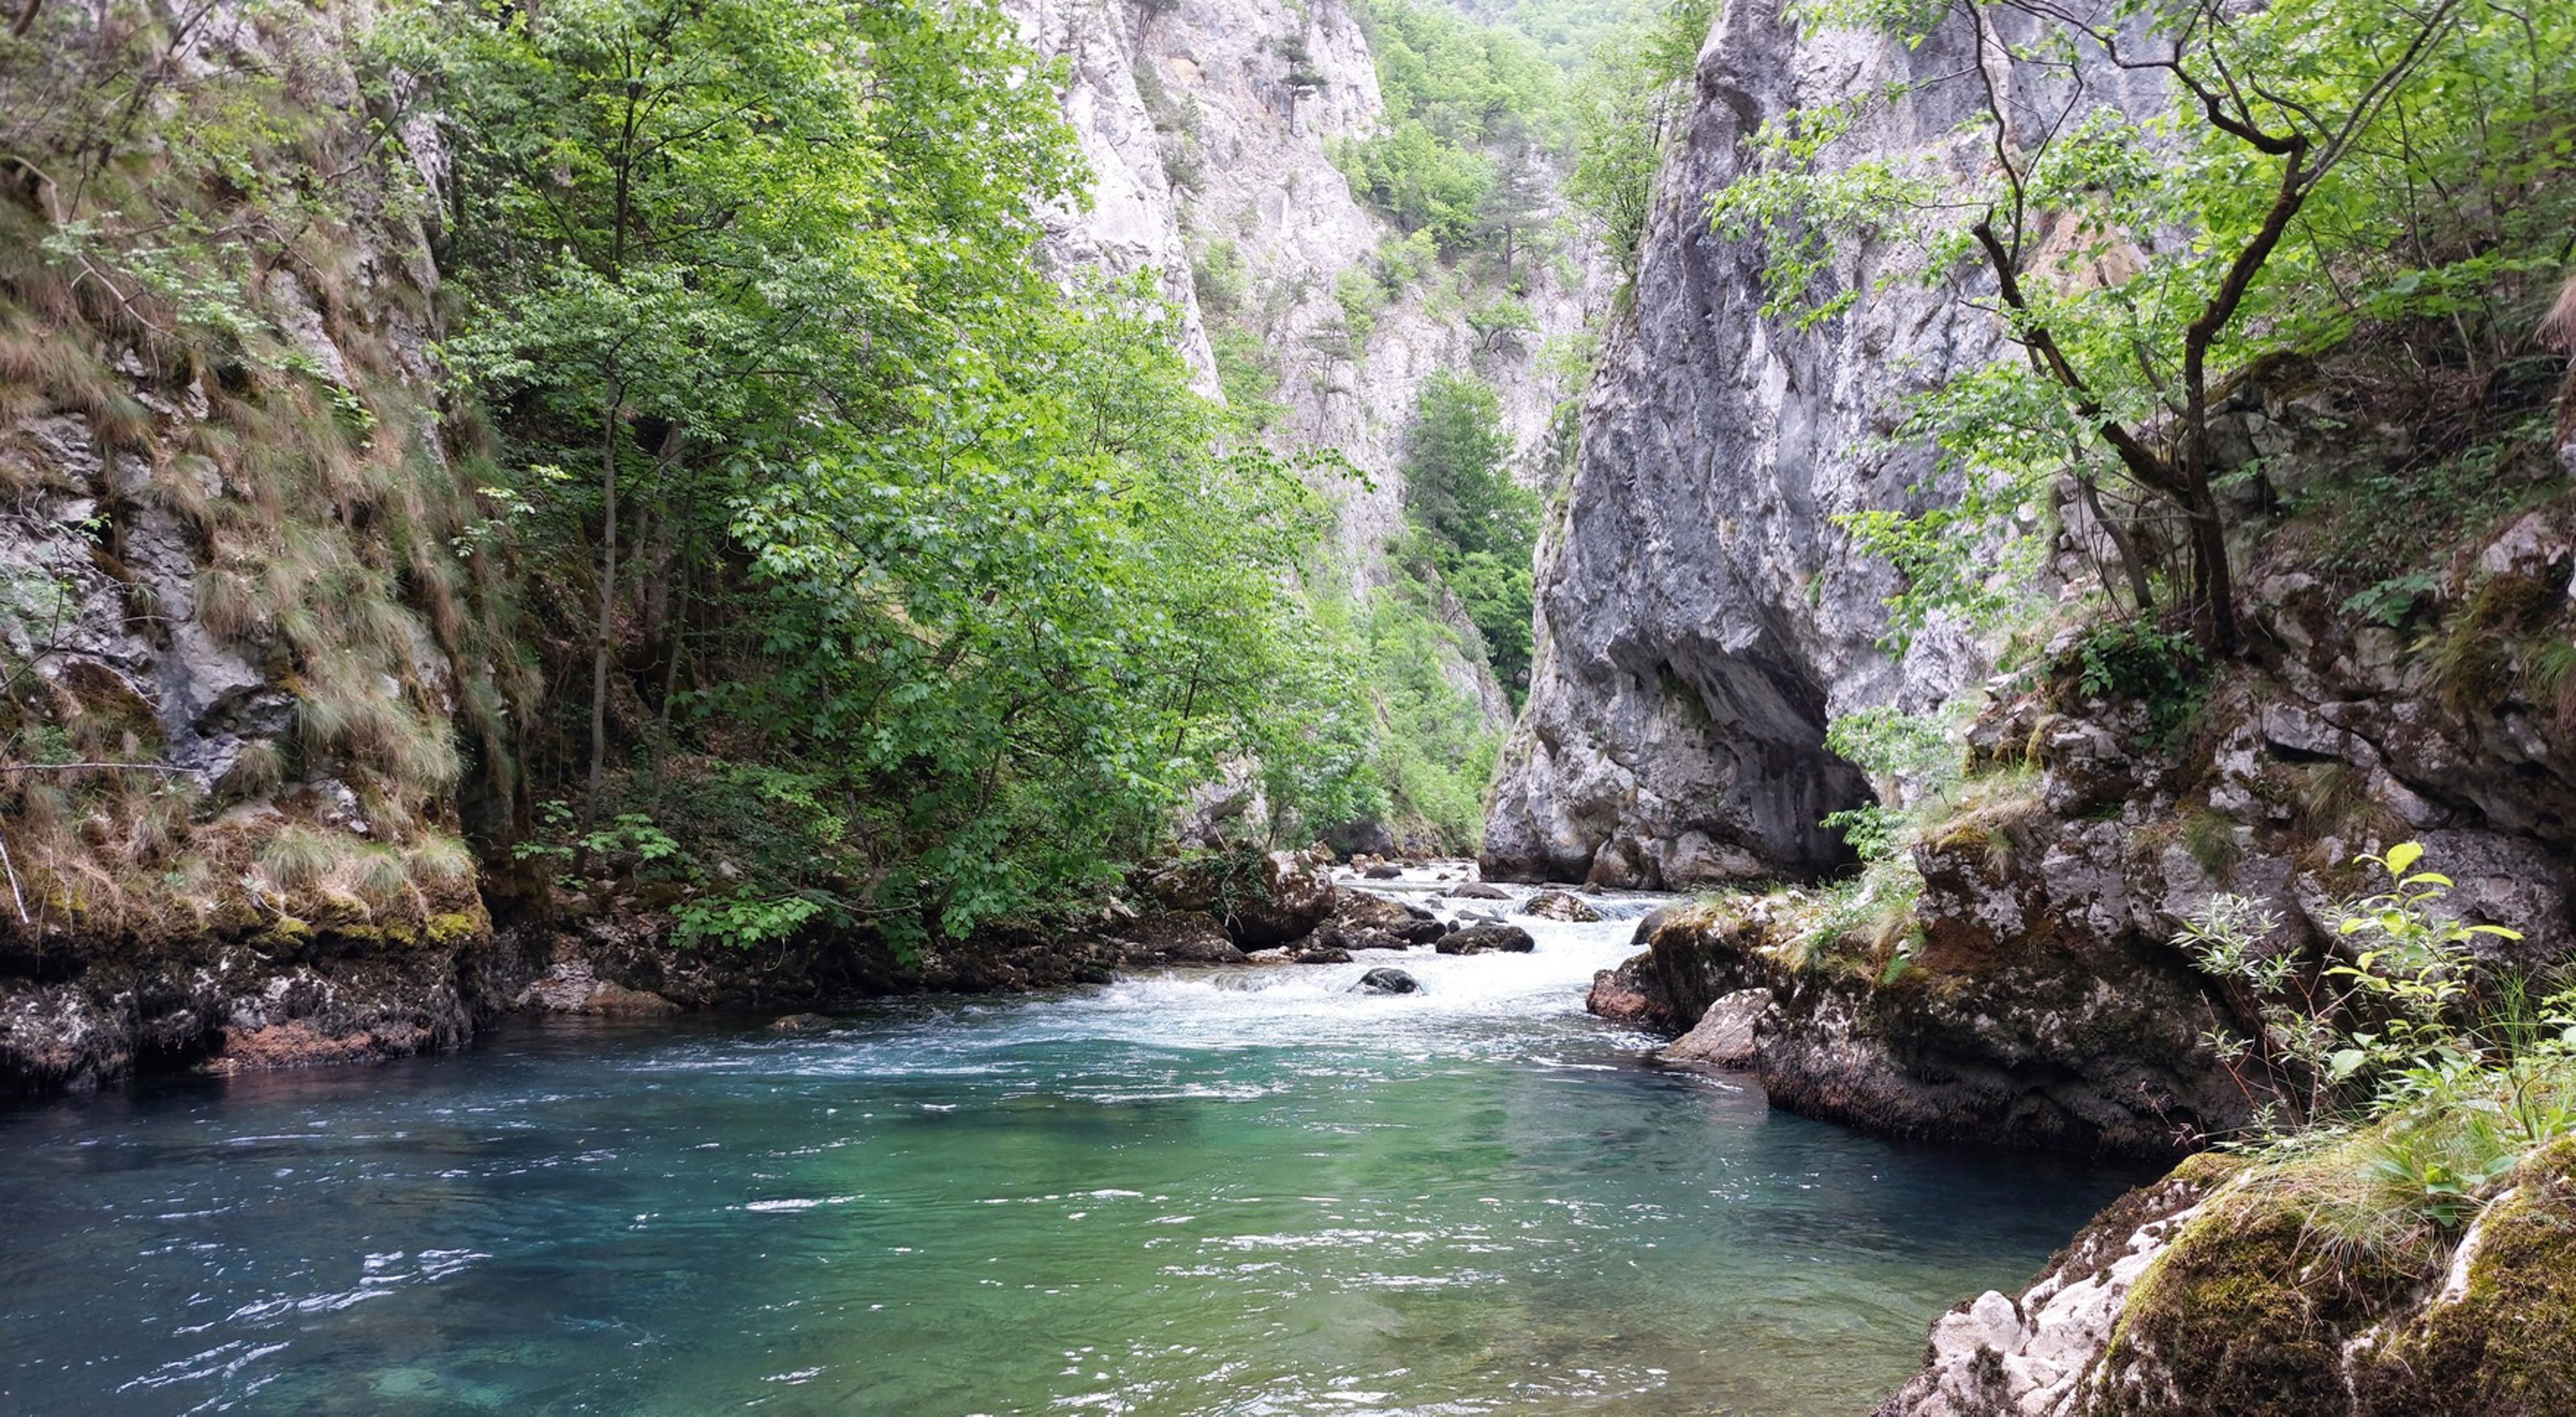 The Bistrica River carves its way through Montenegro's spectacular Đalovića Gorge.